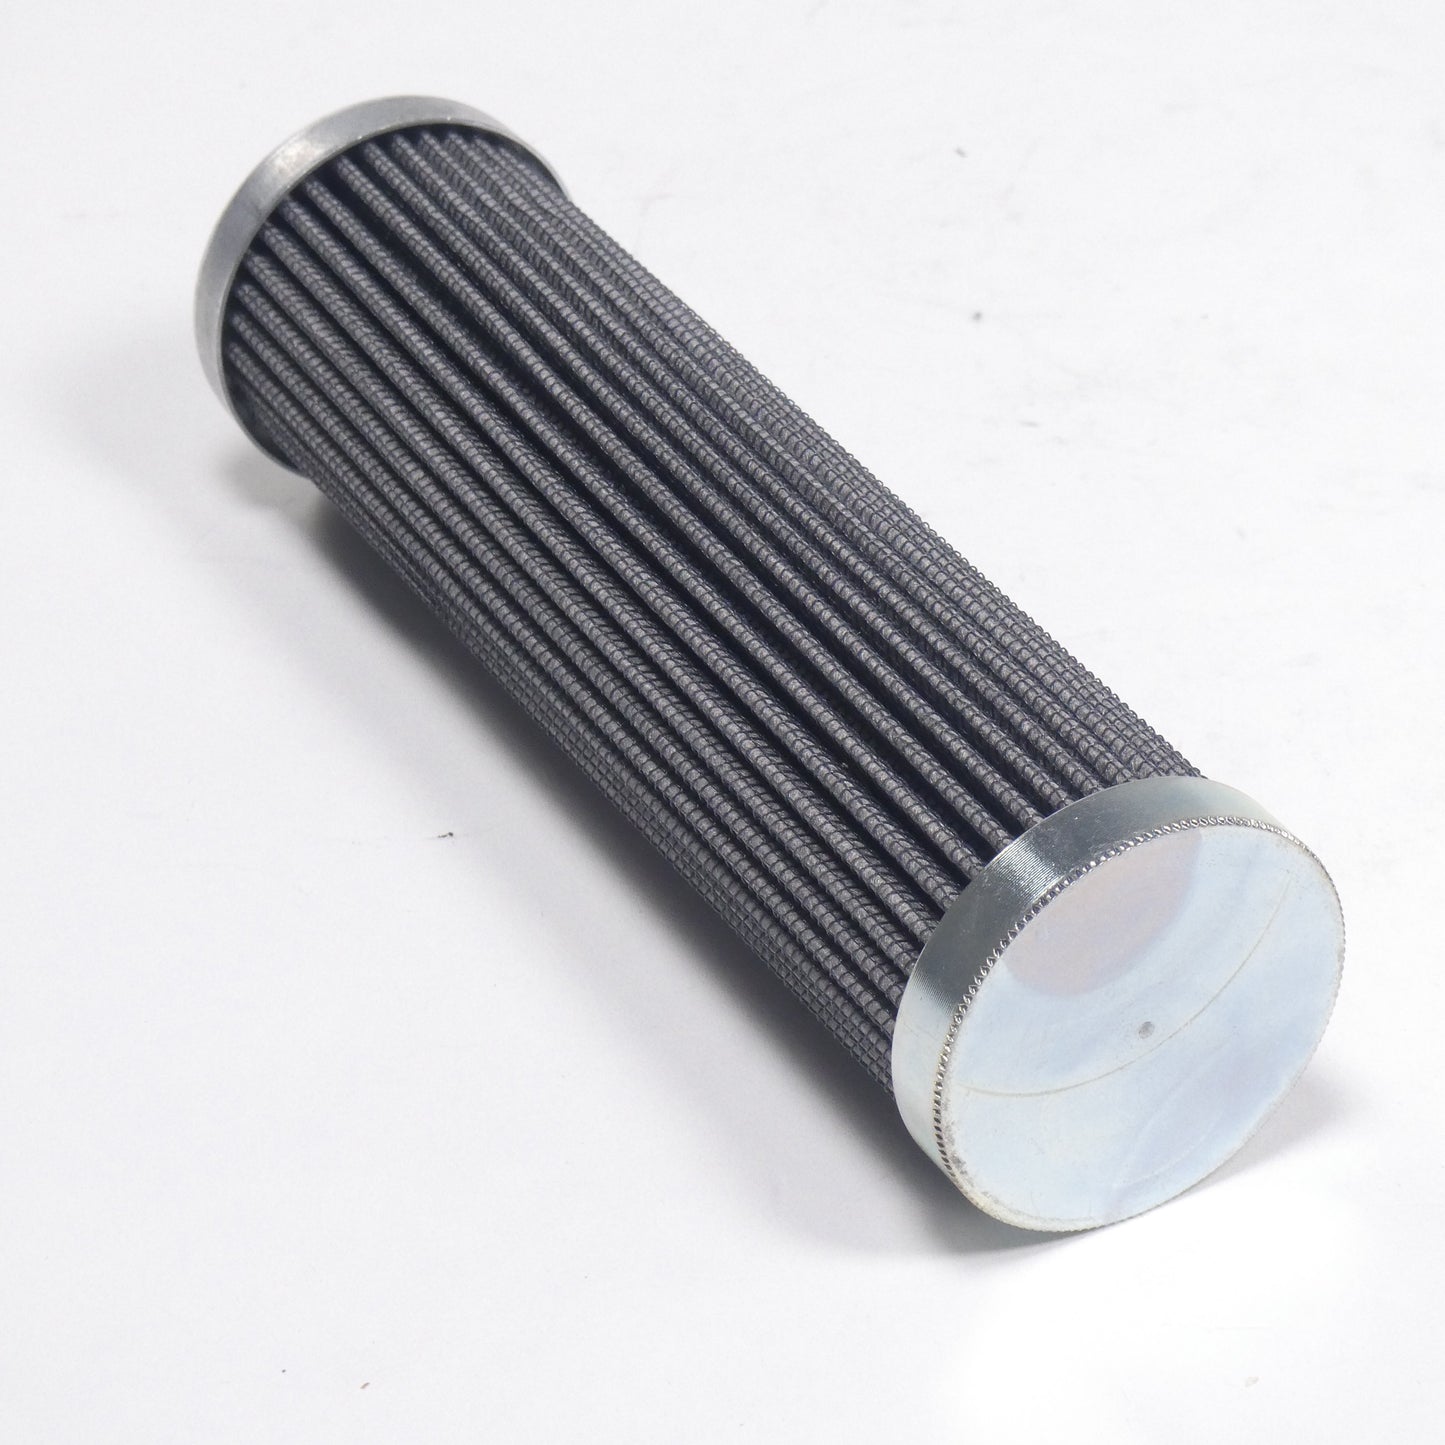 Hydrafil Replacement Filter Element for Unitech AA110A010V